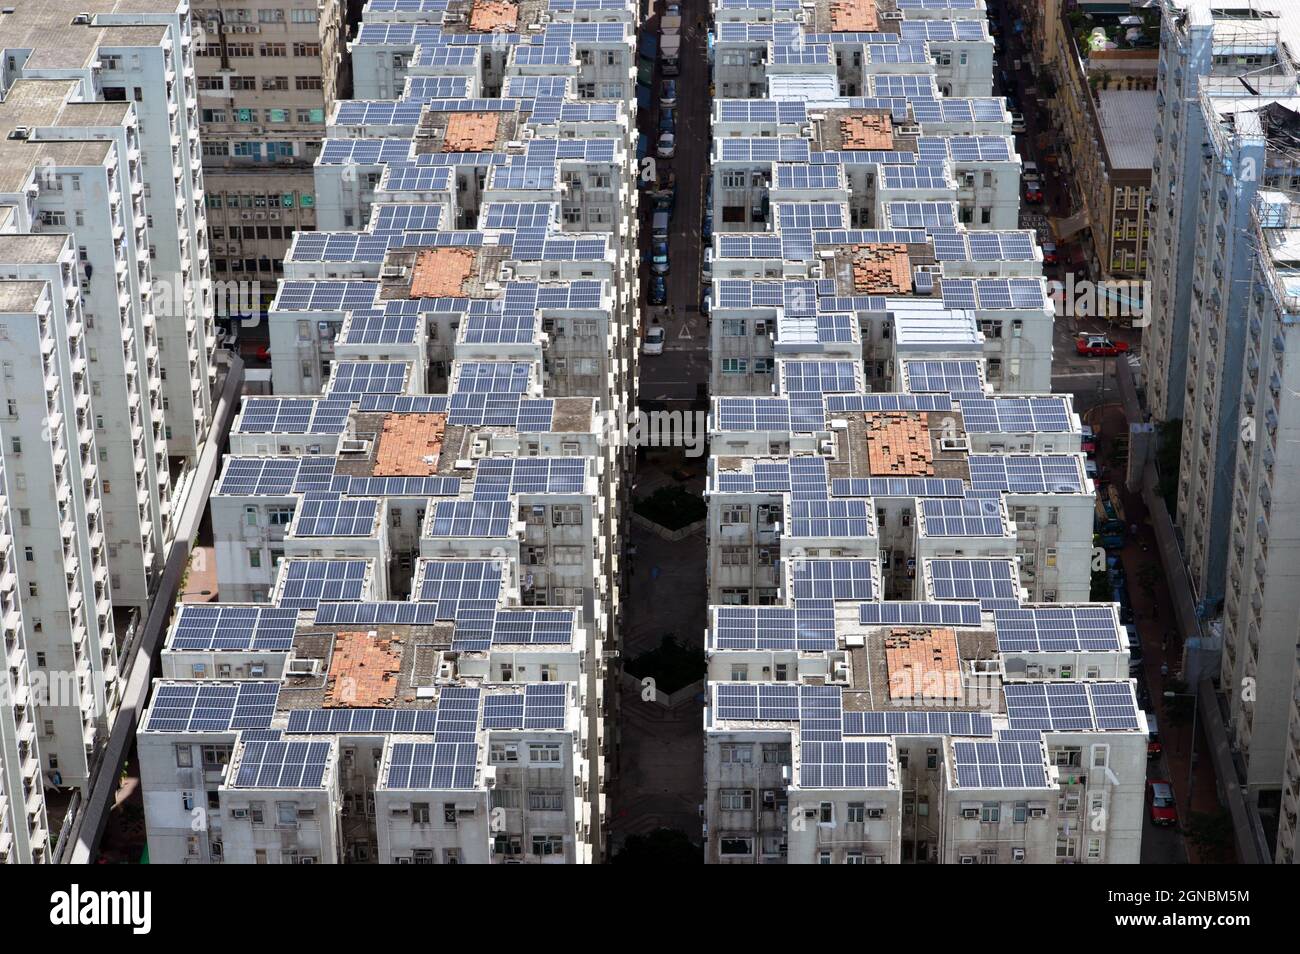 Rooftops with solar panels at Wyler Gardens (偉恆昌新邨), a residential area in To Kwa Wan, Kowloon, Hong Kong Stock Photo